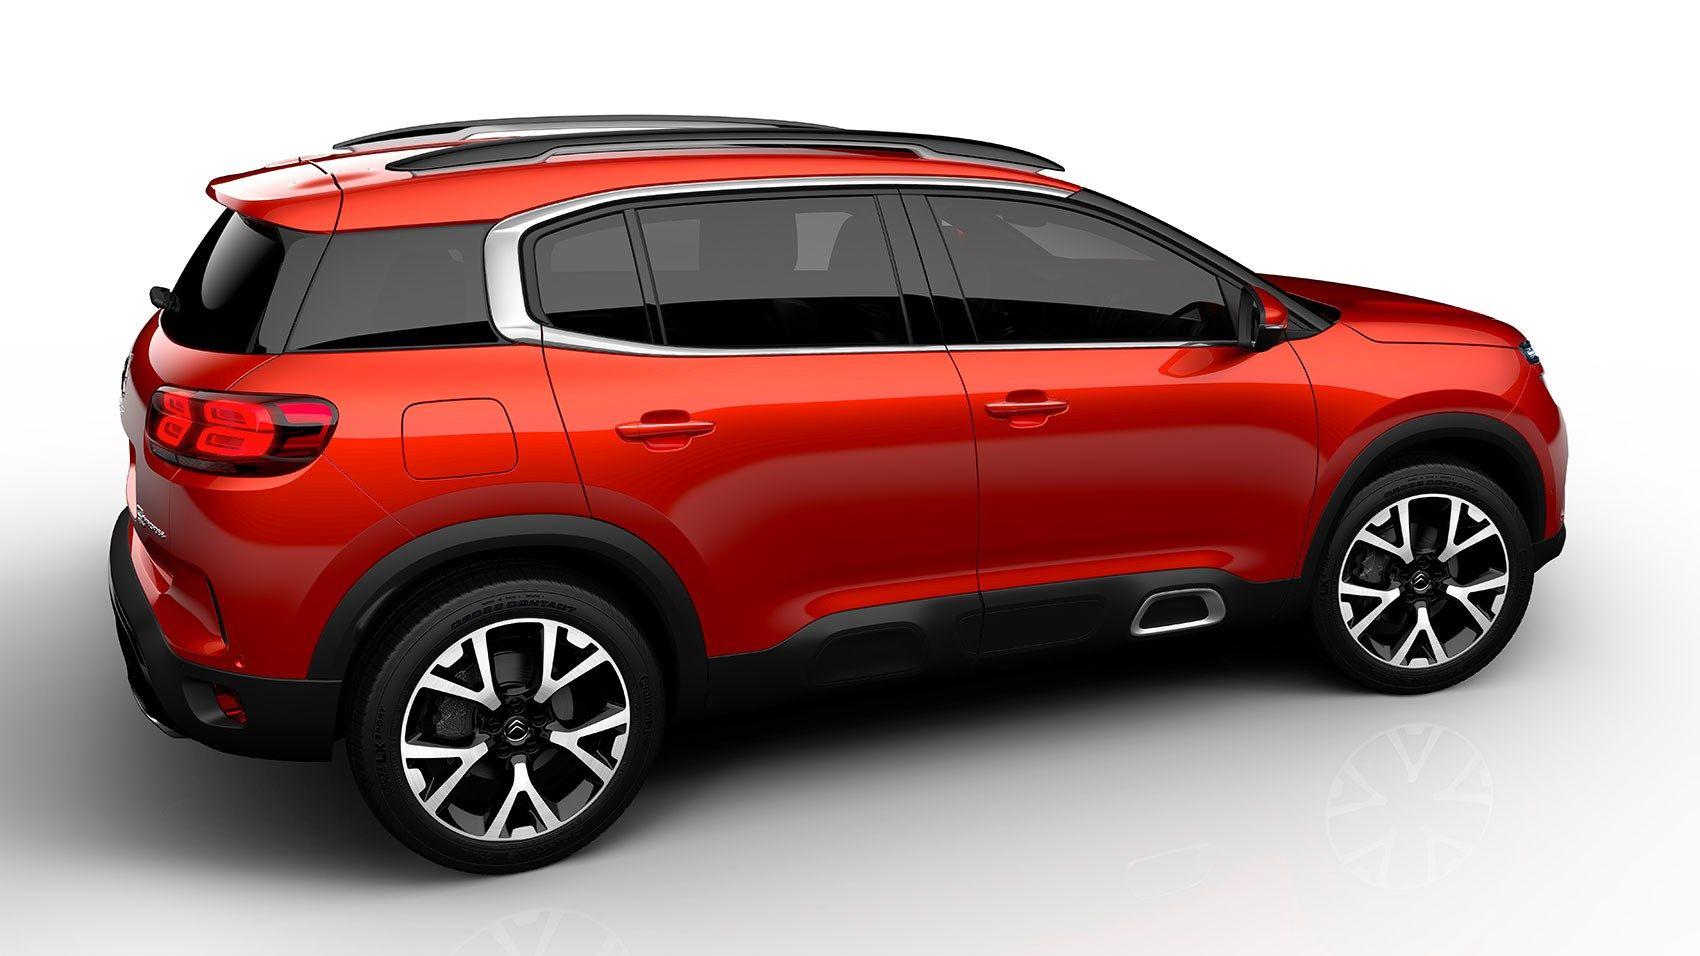 Citroen C5 Aircross (2018) revealed in Shanghai: news and picture